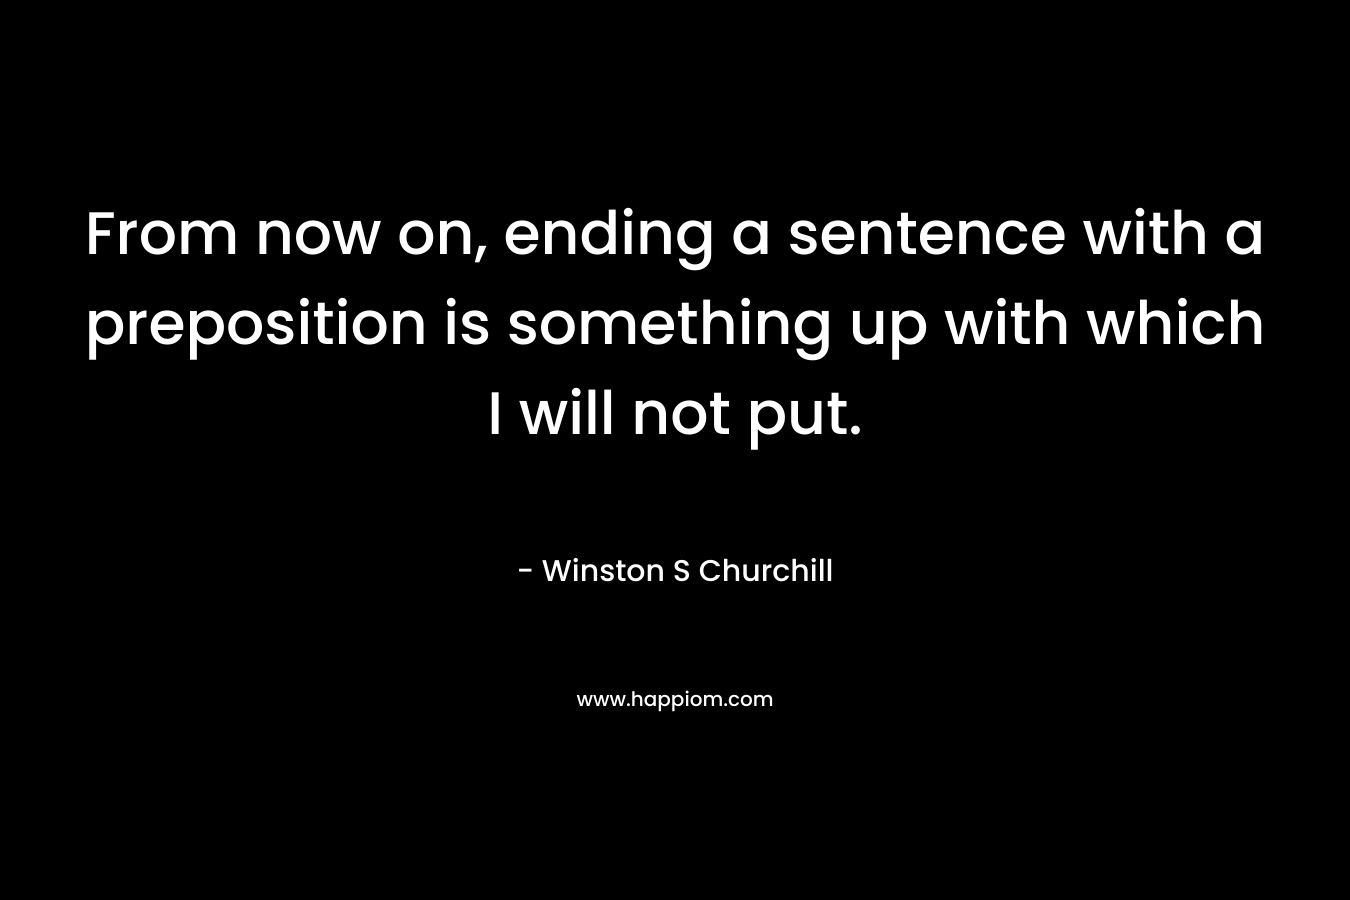 From now on, ending a sentence with a preposition is something up with which I will not put. – Winston S Churchill